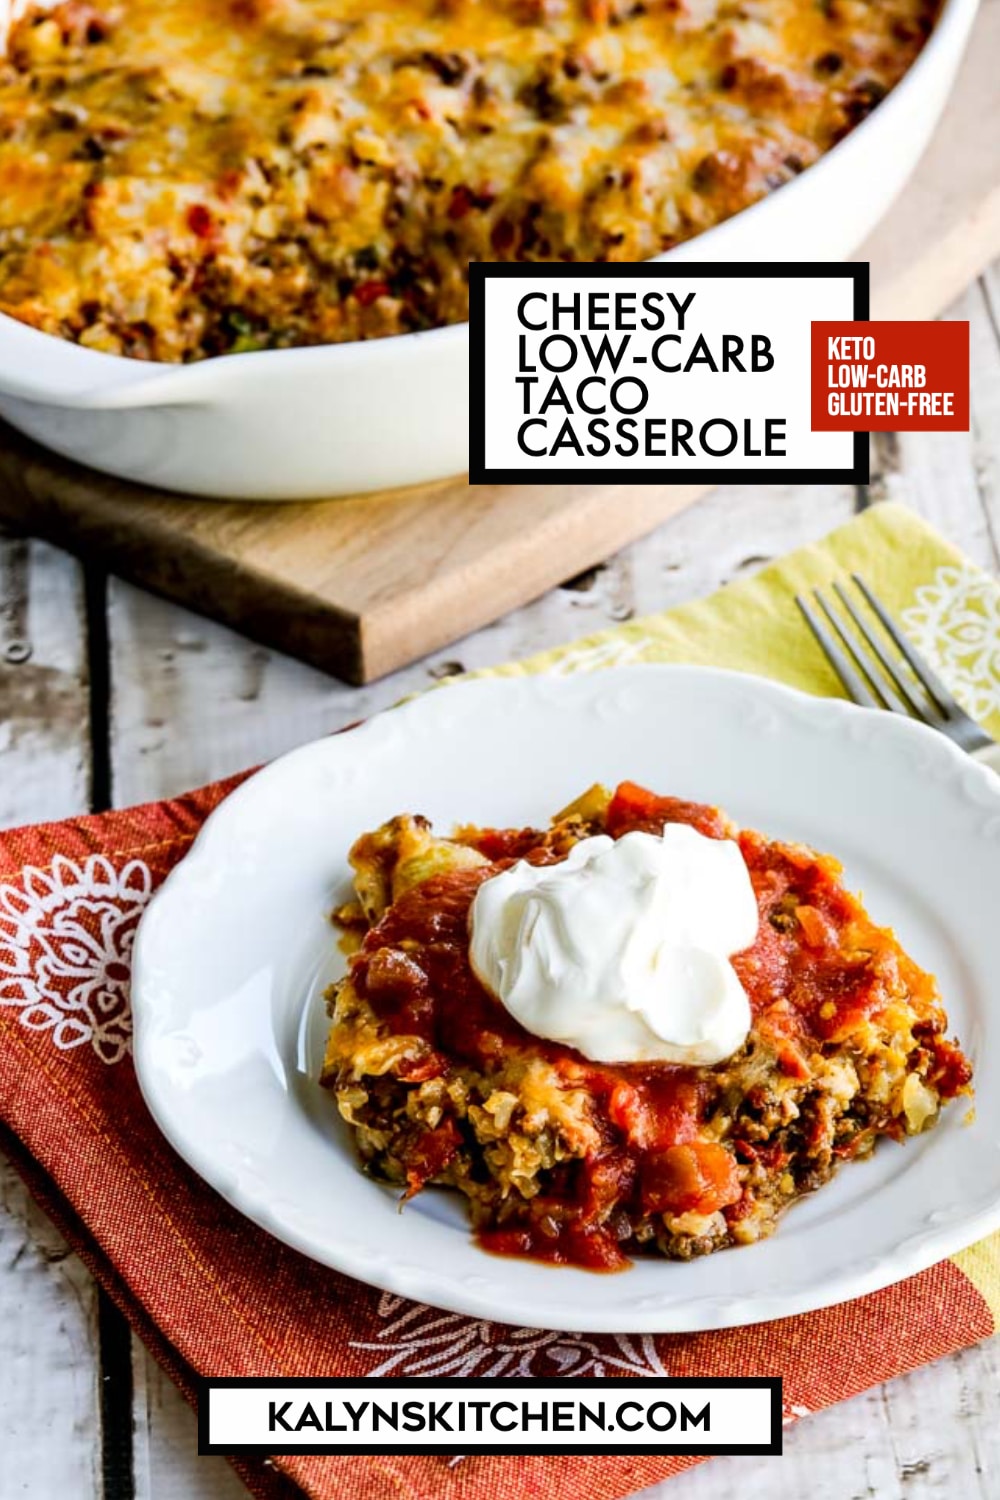 Pinterest image of Cheesy Low-Carb Taco Casserole